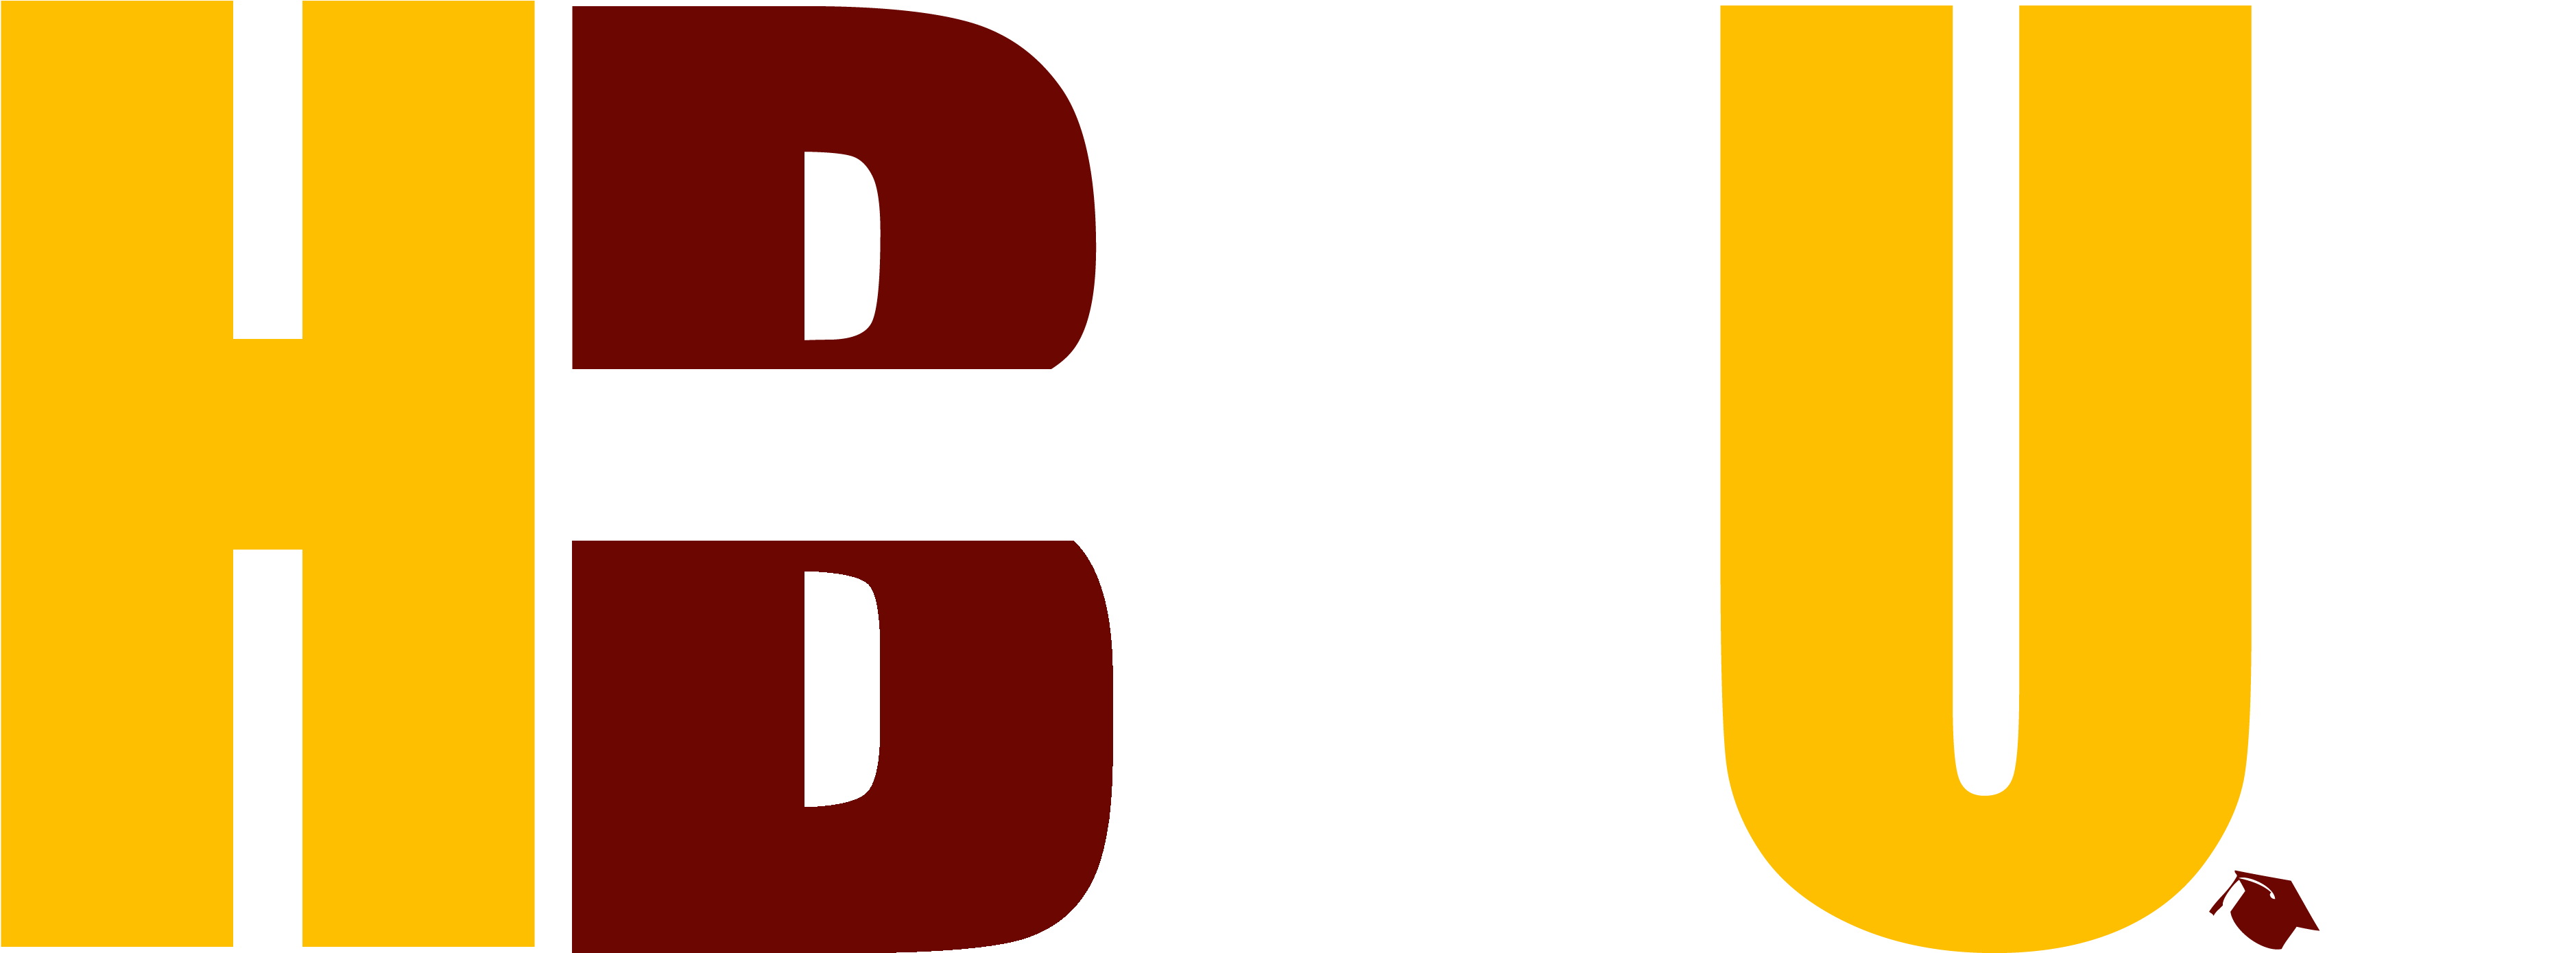 Hbcu On Demand Logo - Historically Black Colleges And Universities (4000x1875)